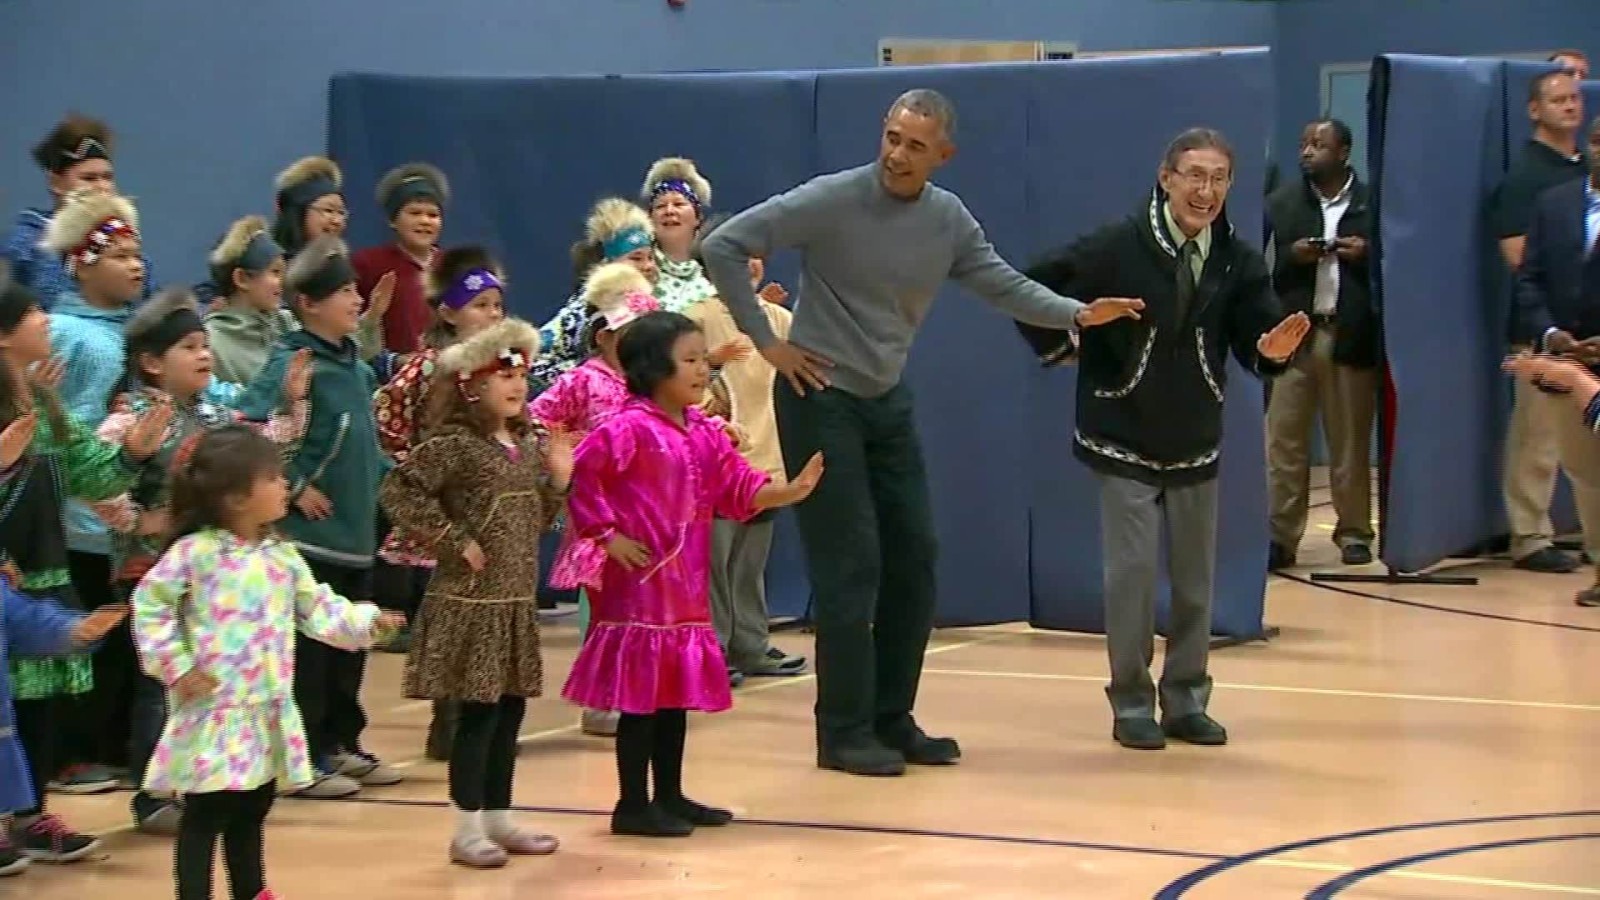 Obama busts a move with Alaskan middle schoolers - CNNPolitics1600 x 900